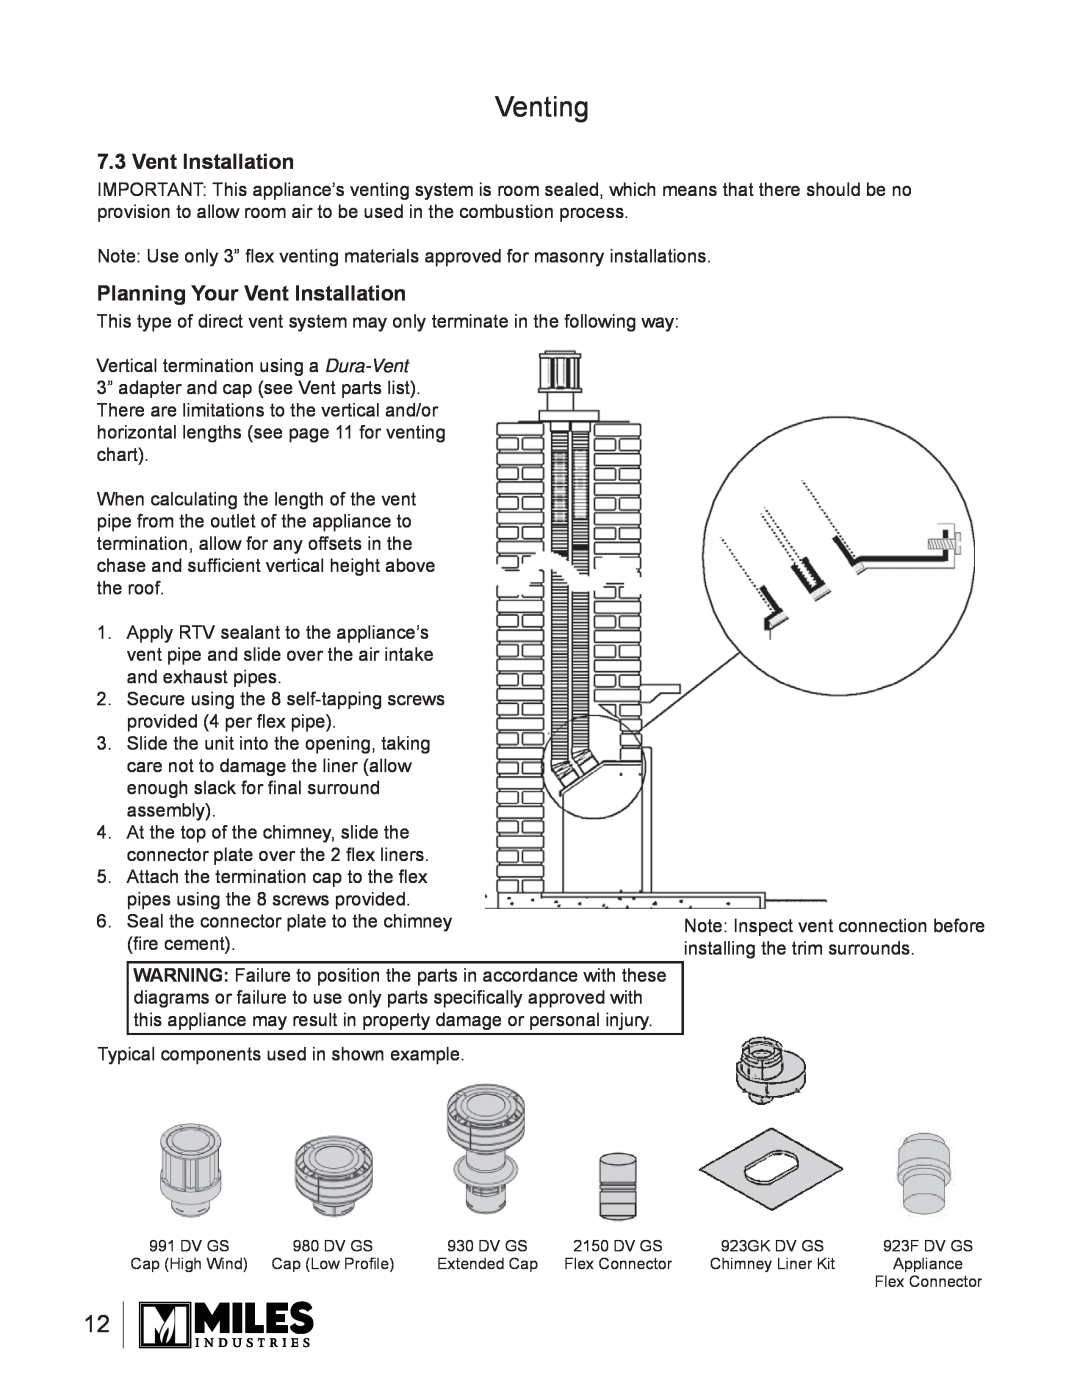 Valor Auto Companion Inc 739DVN, 739DVP owner manual Venting, Planning Your Vent Installation 